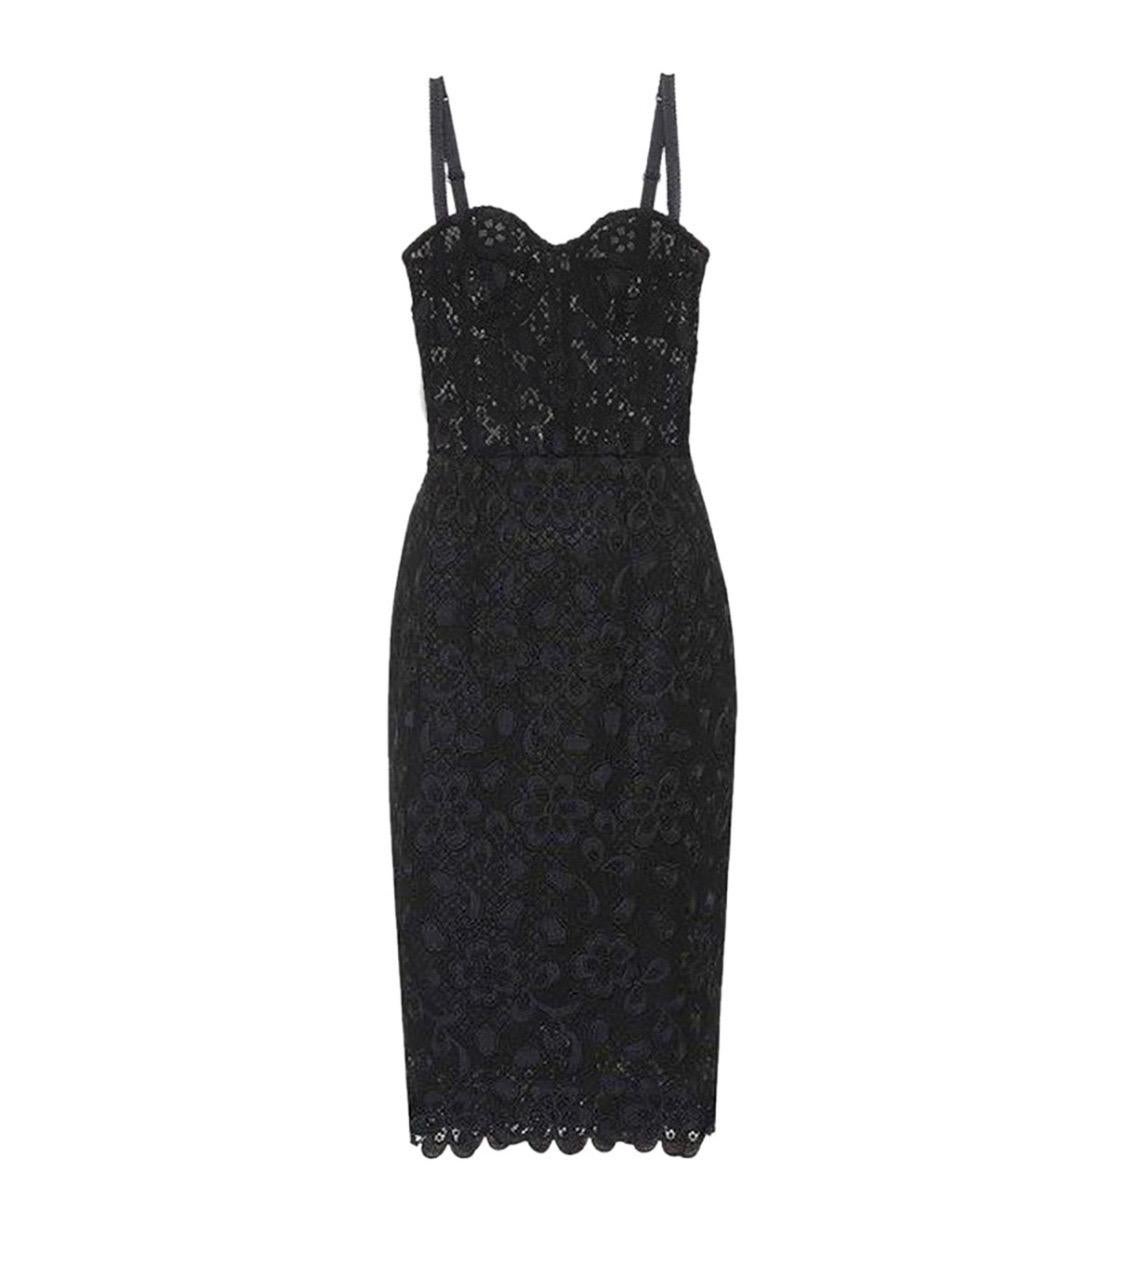 Dolce & Gabbana sleeveless sheath dress is
overlaid in delicate floral lace 2